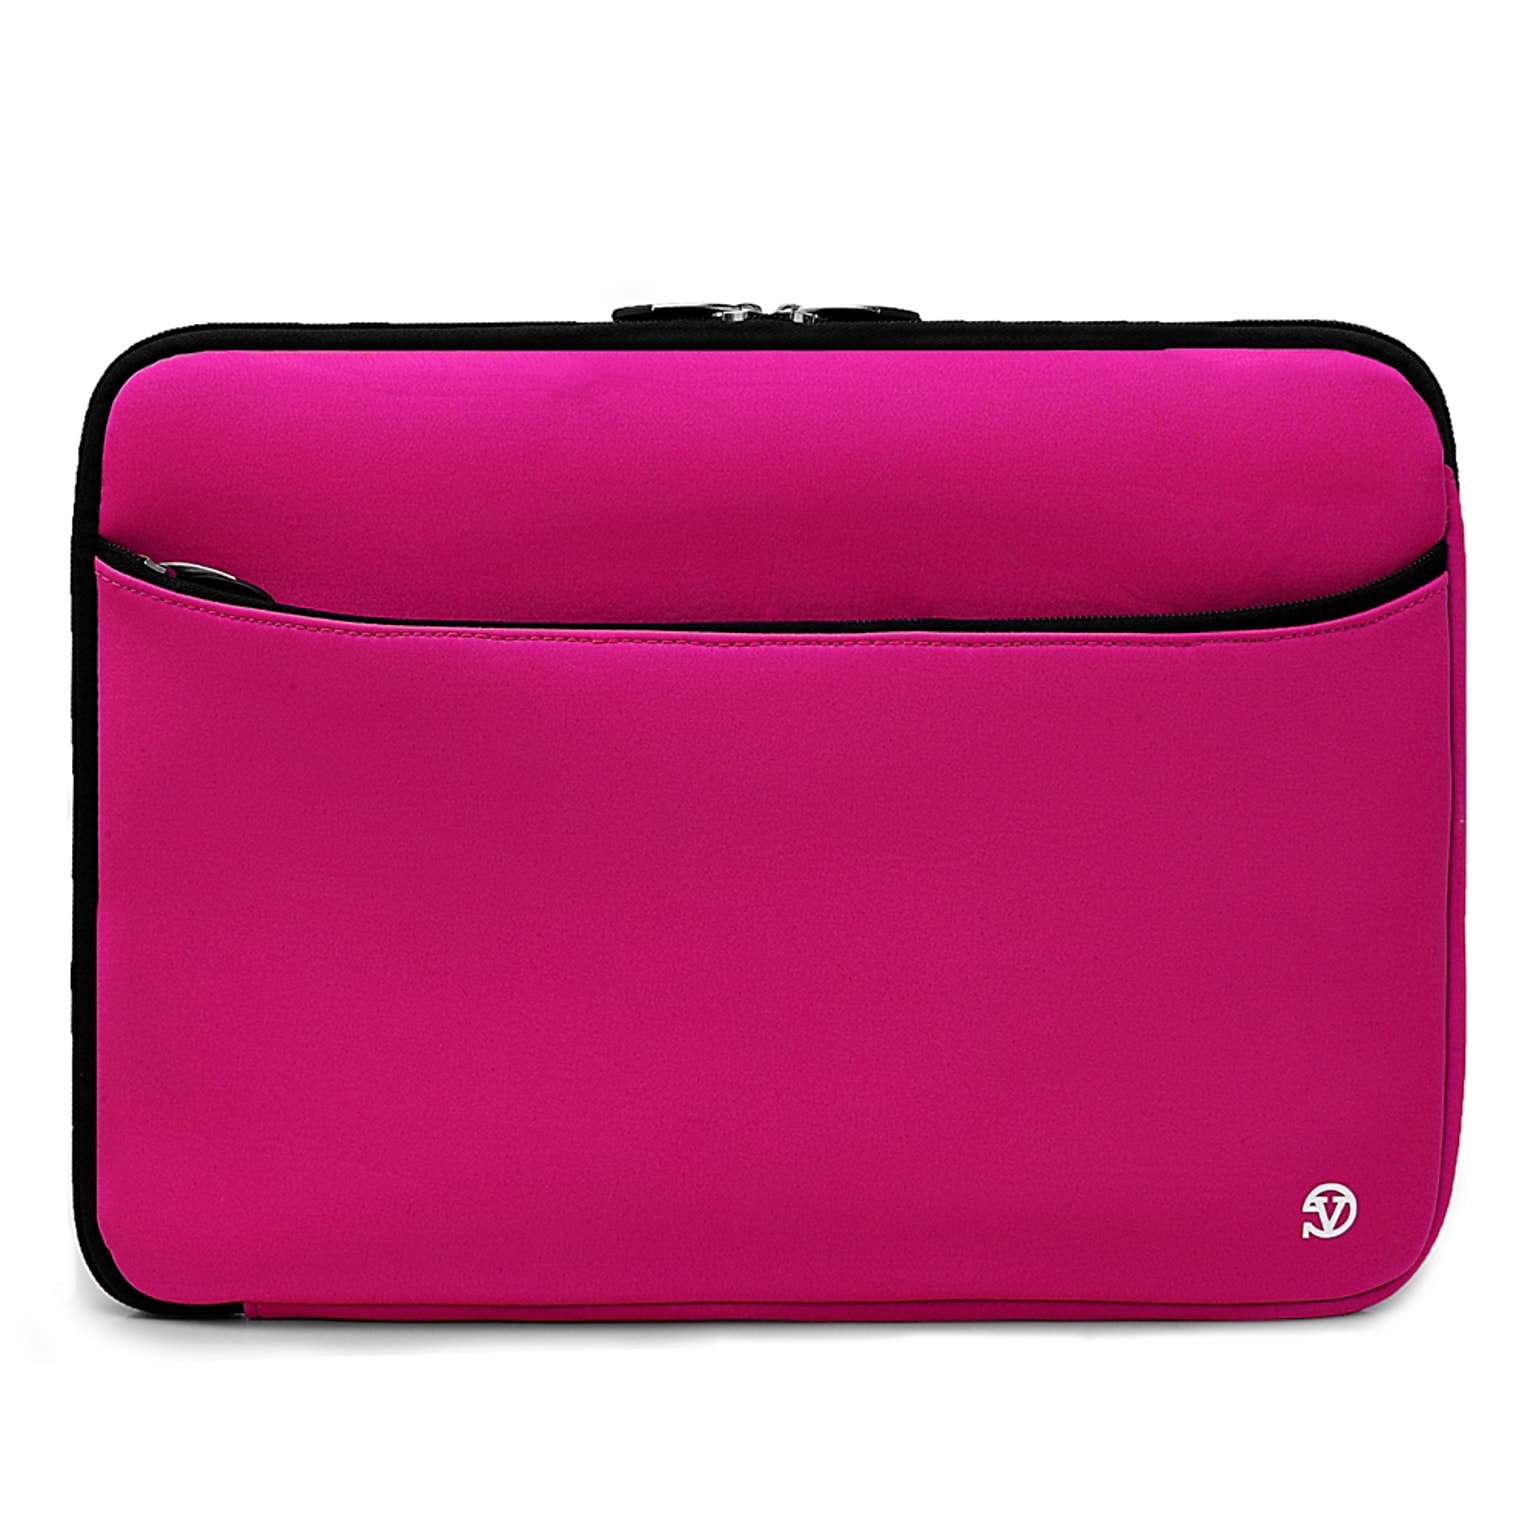 Vangoddy Protective Neoprene Laptop Carrying Sleeve Fits up to 14 Laptops (Magenta)